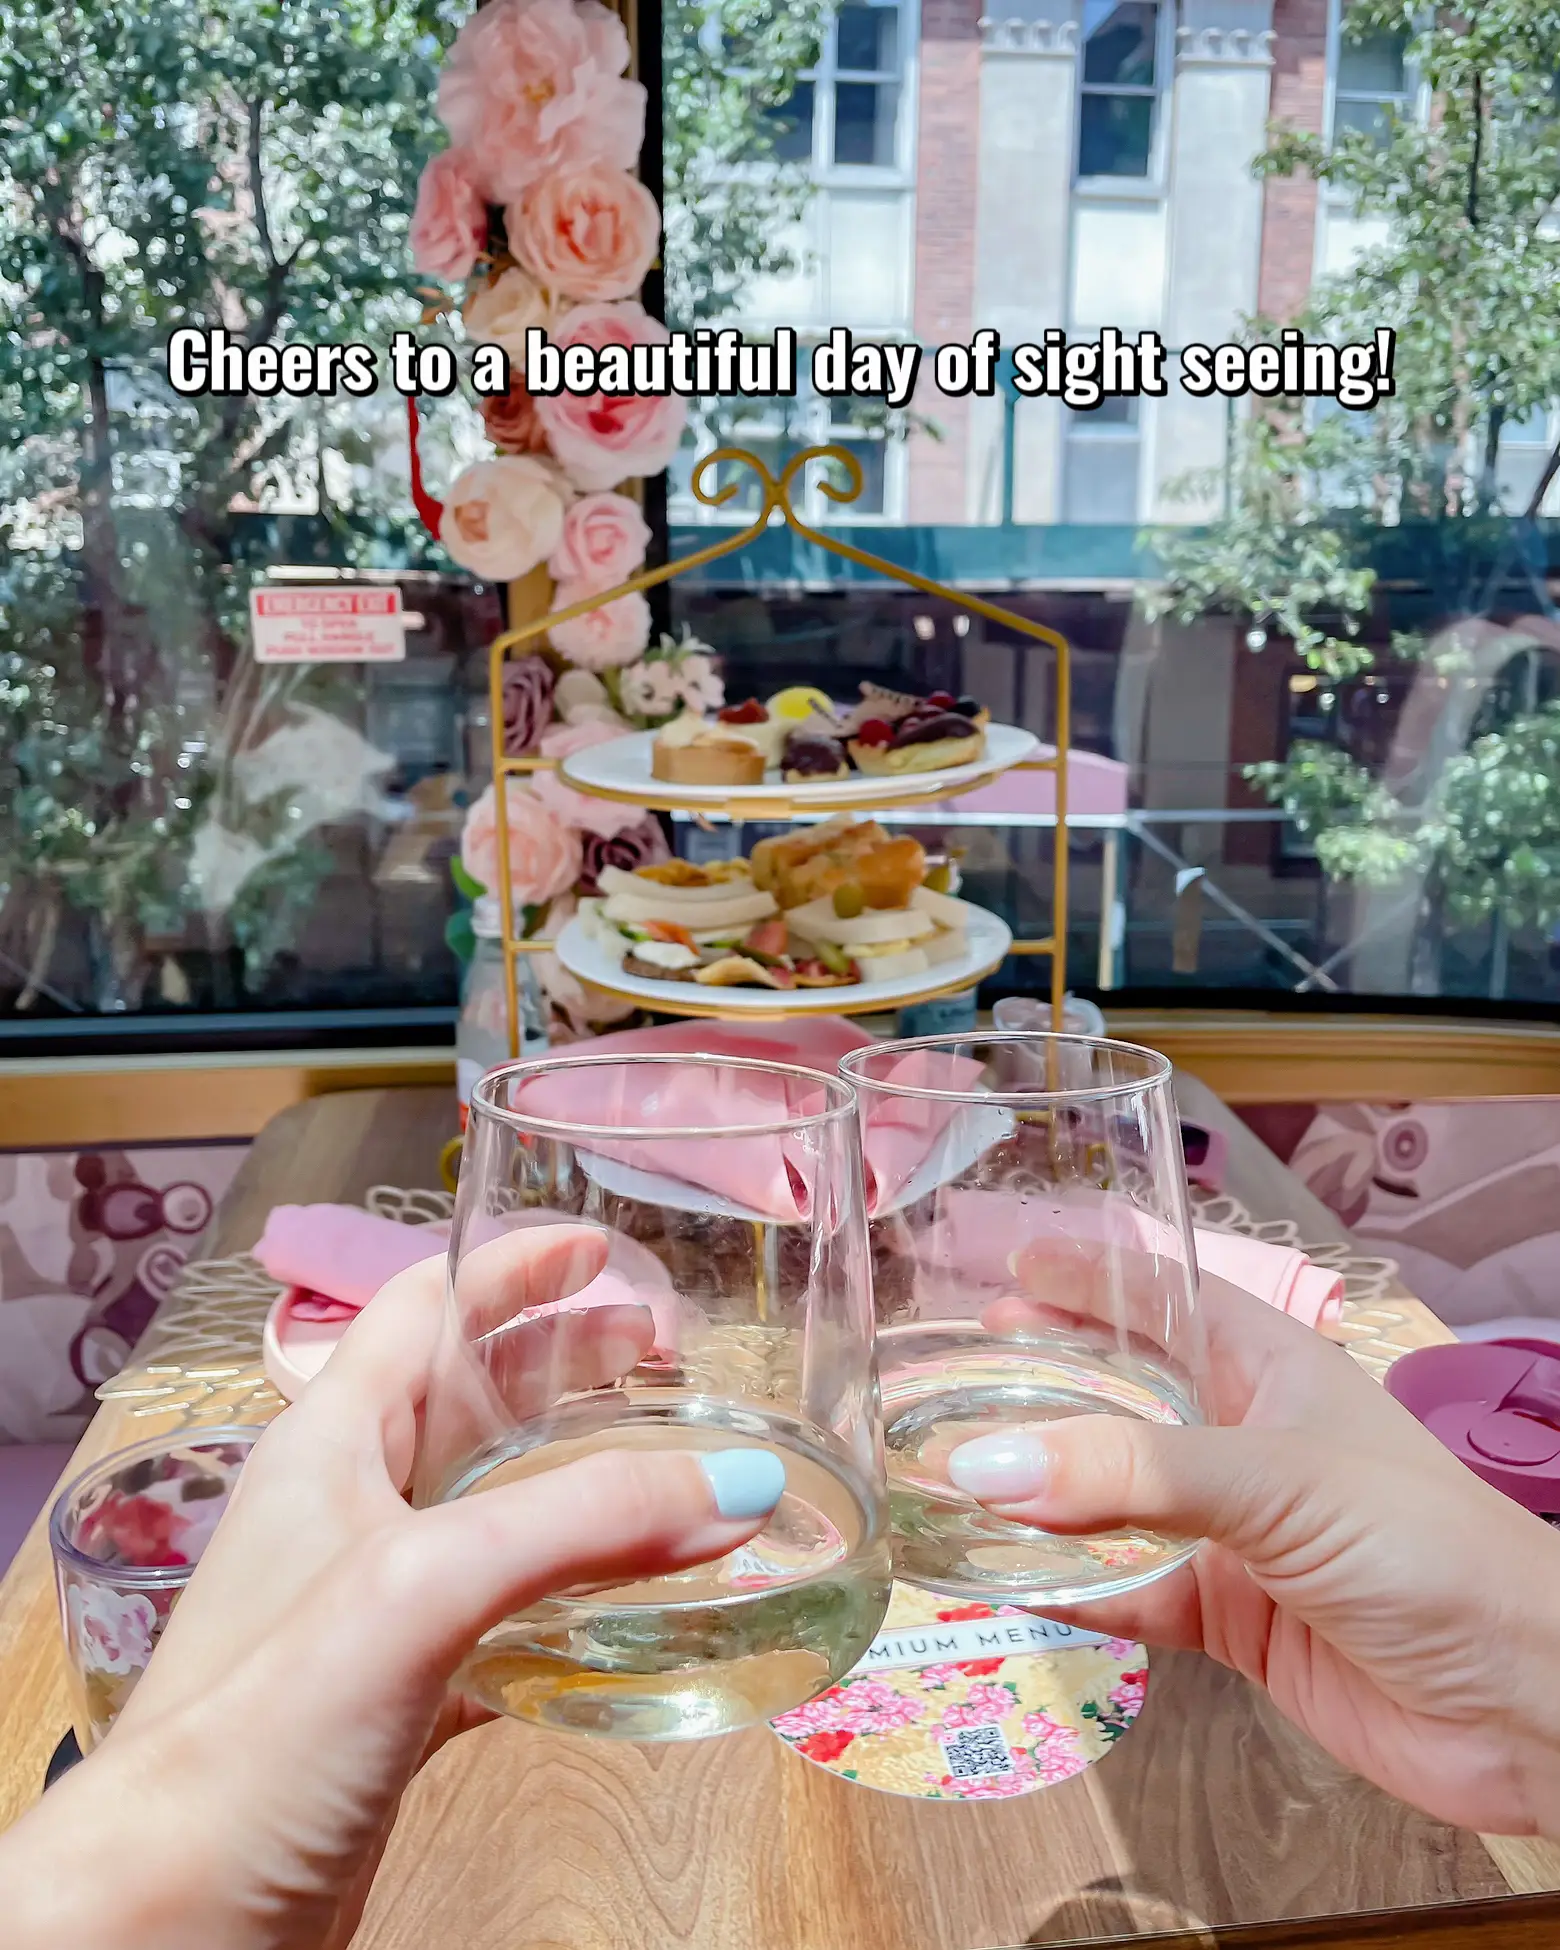  Two people are sitting at a table with a plate of food in front of them. They are holding wine glasses, and there is a potted plant nearby. The words "Cheers to a beautiful day